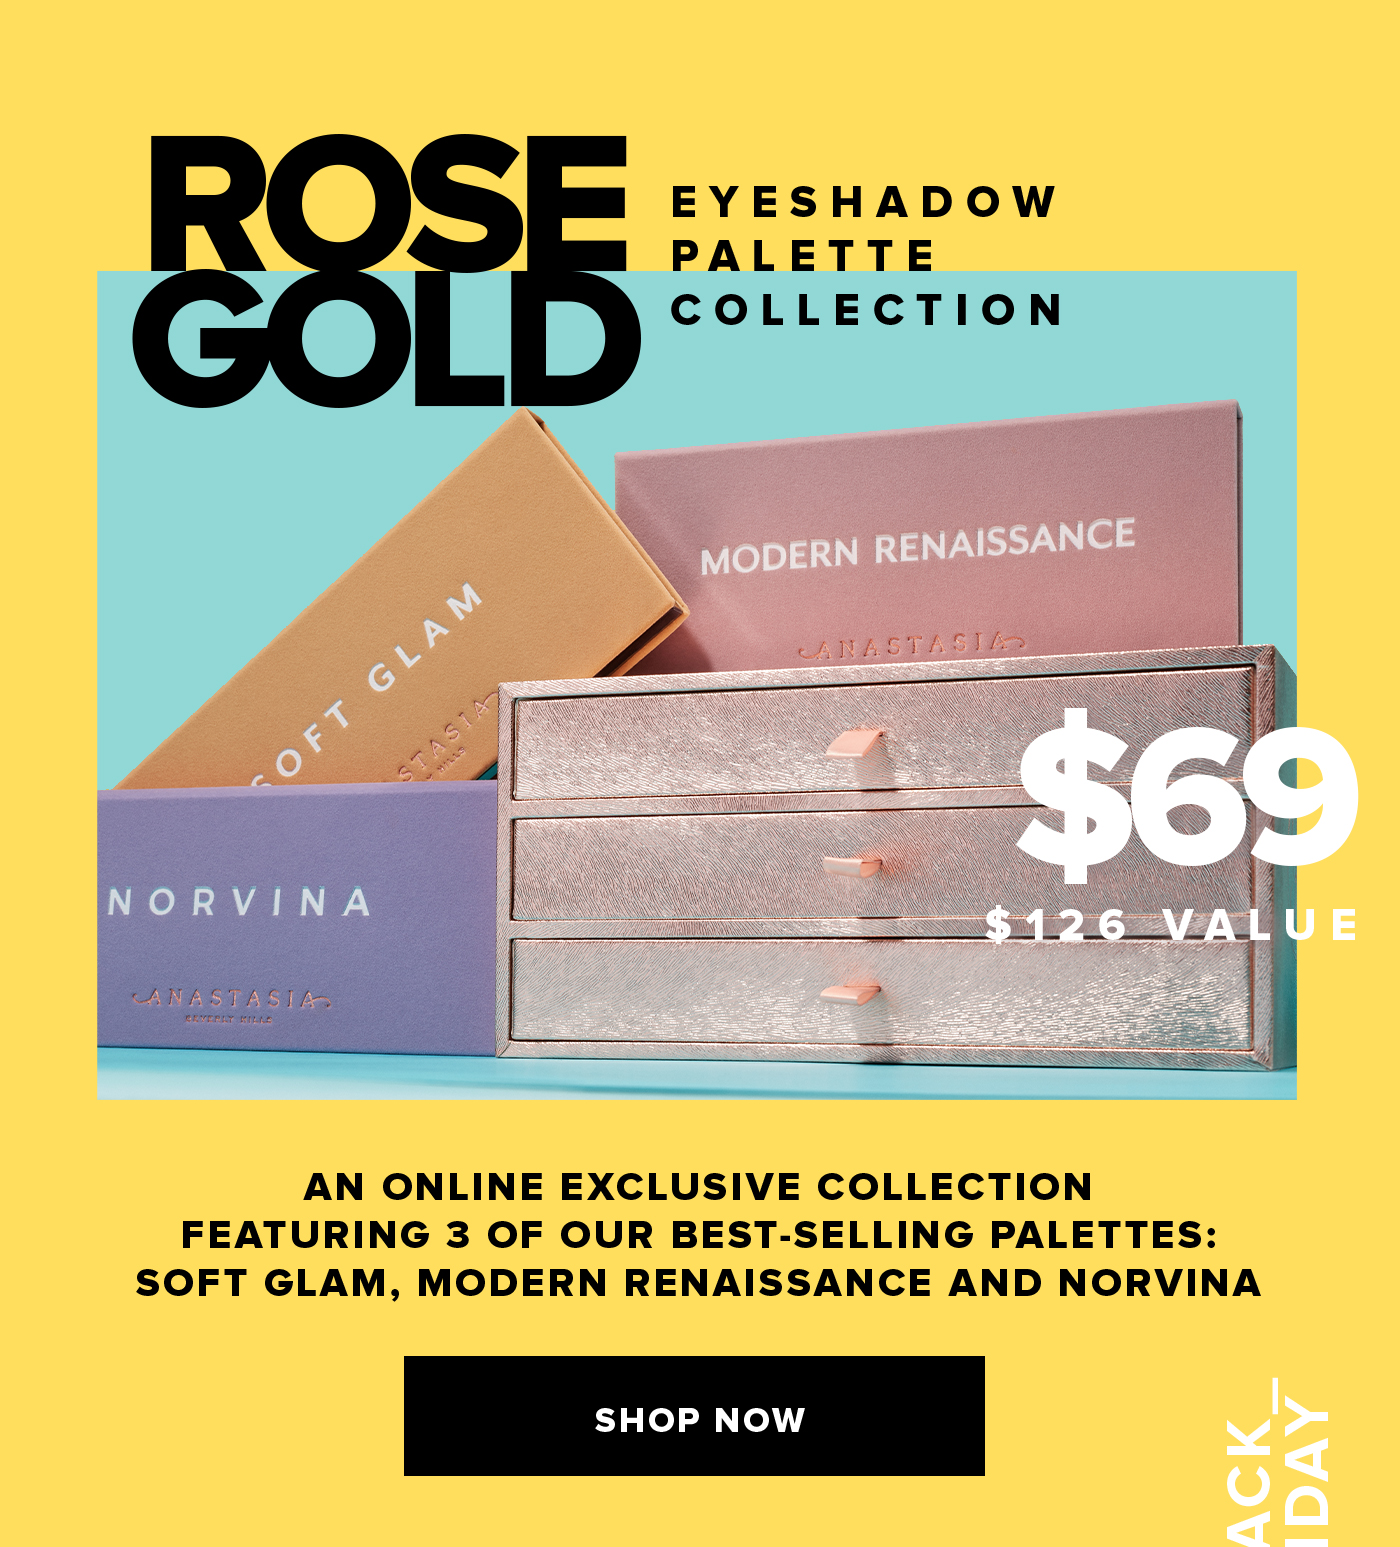 ROSE GOLD EYESHADOW PALETTE VAULT $69 $126 VALUE AN ONLINE EXCLUSIVE COLLECTION FEATURING 3 OF OUR BEST-SELLING PALETTES: SOFT GLAM, MODERN RENAISSANCE AND NORVINA SHOP NOW